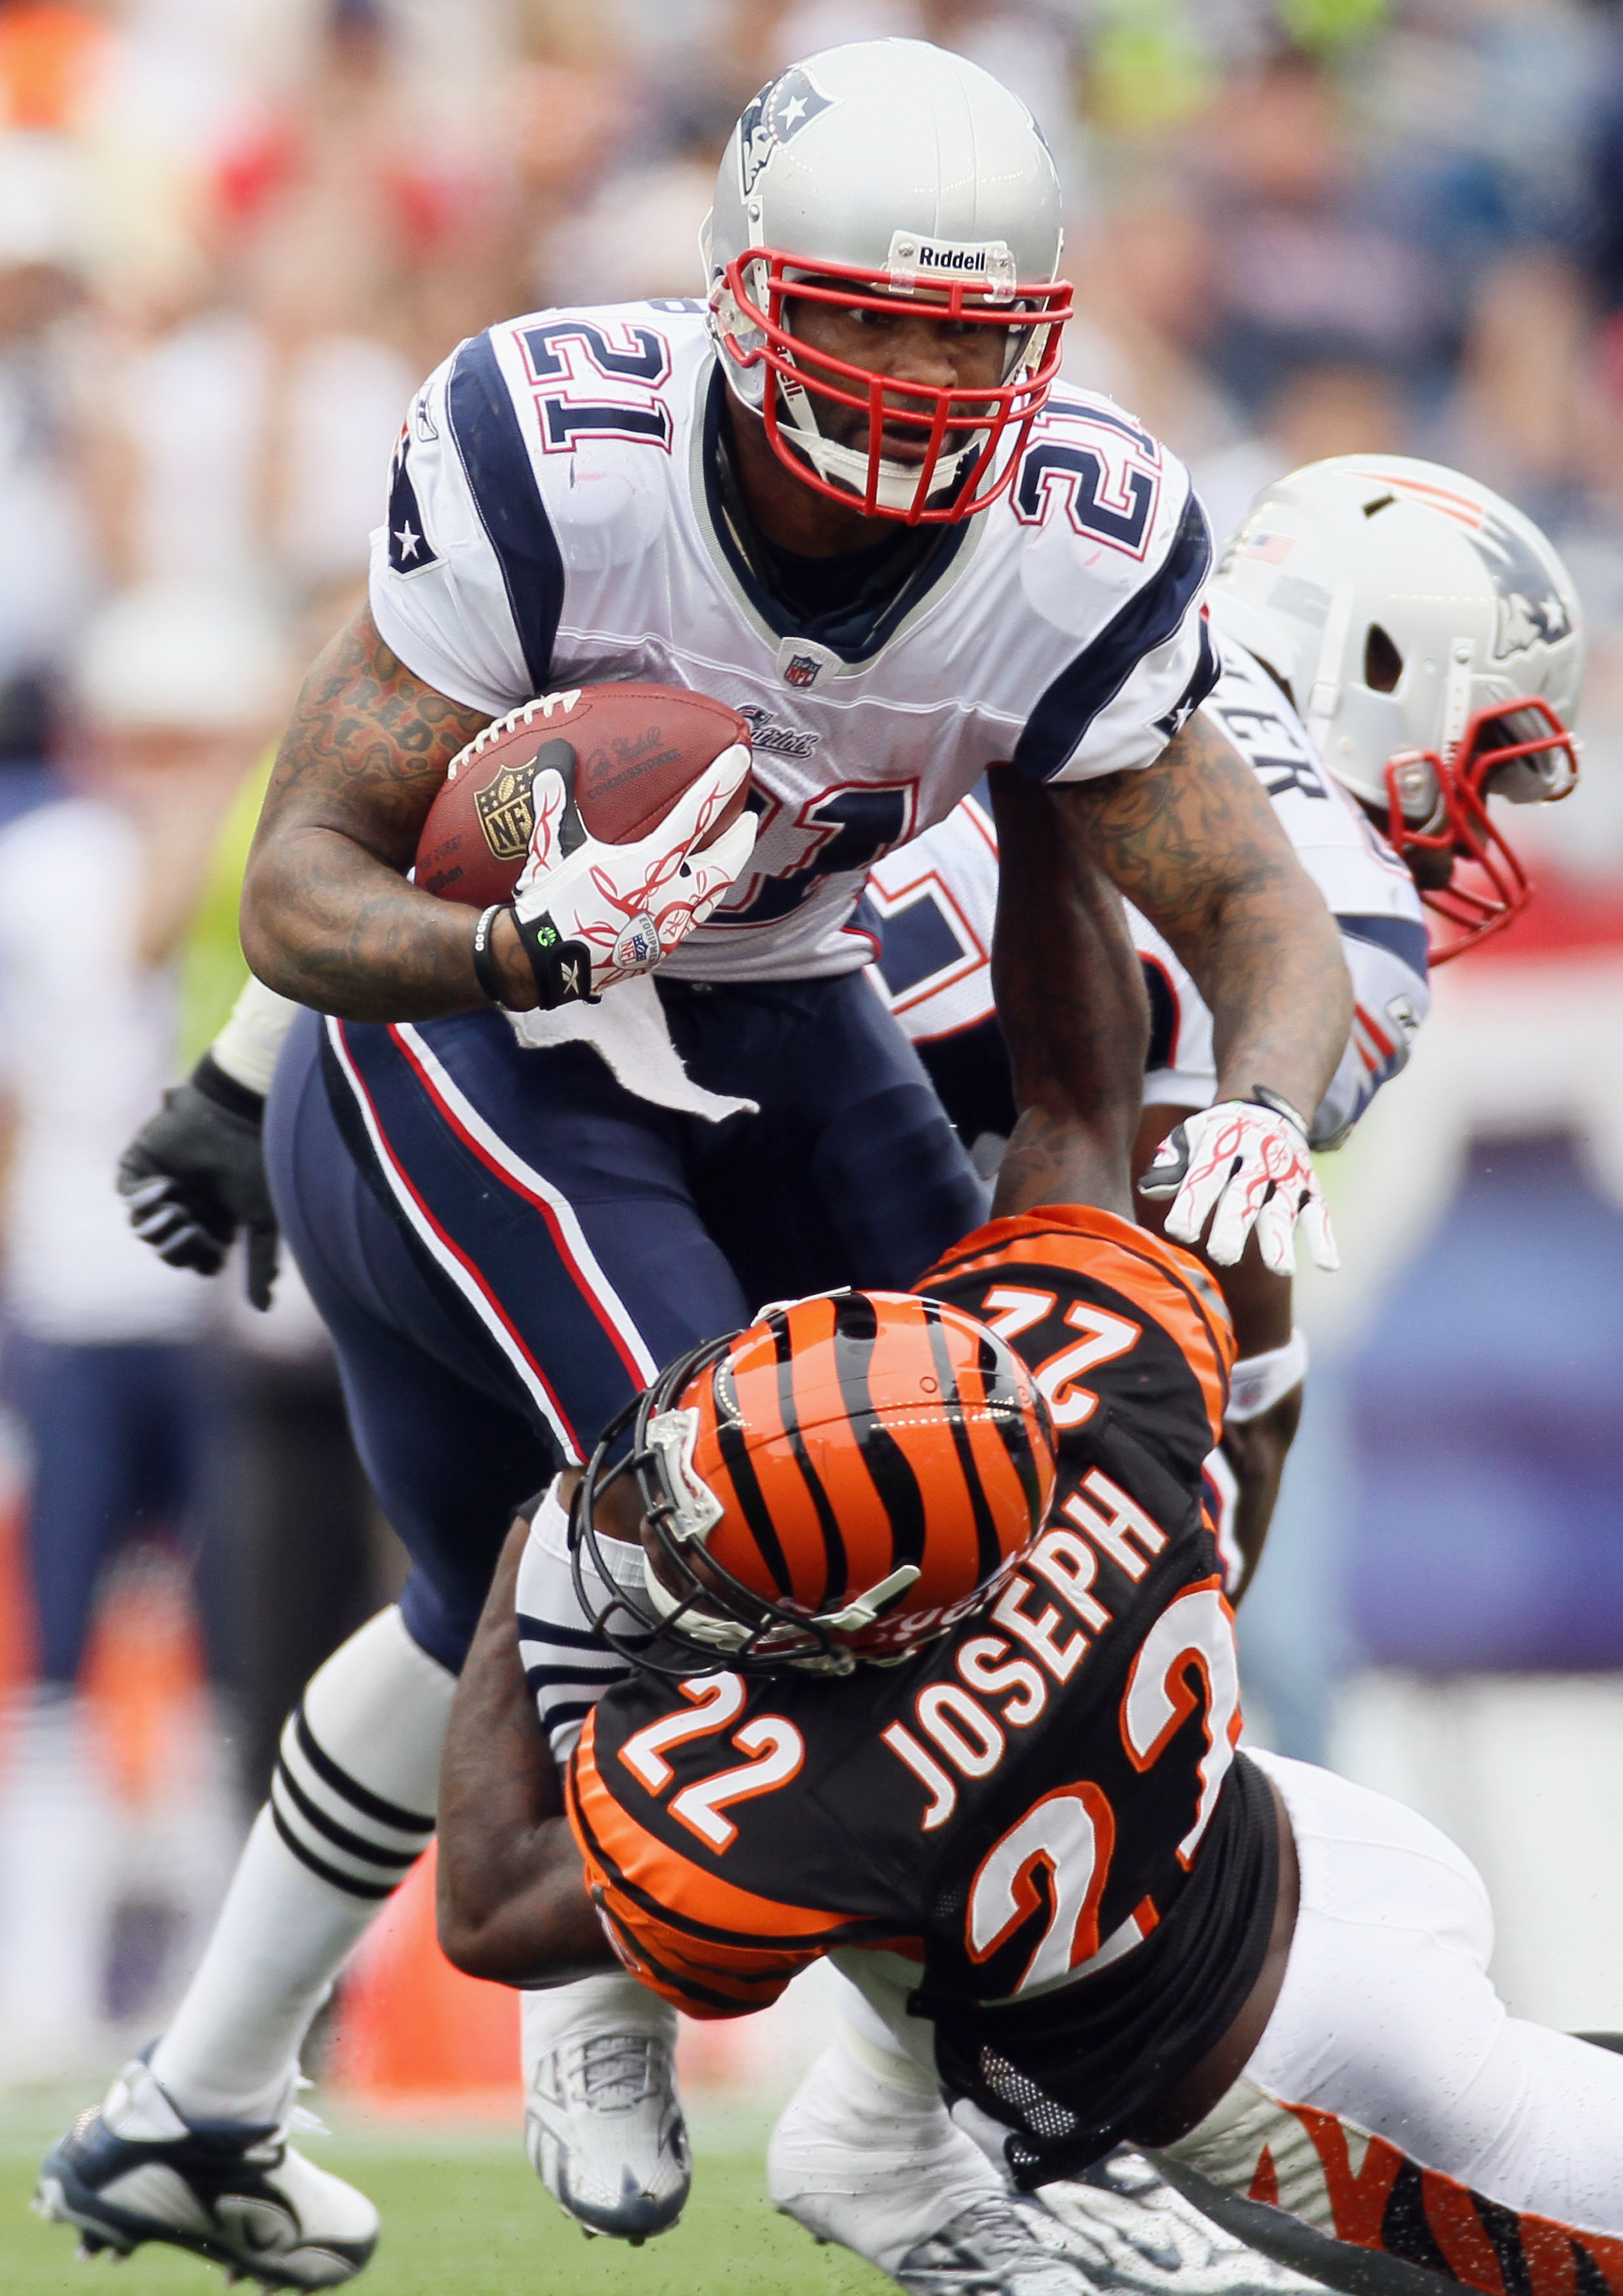 FOXBORO, MA - SEPTEMBER 12:  Fred Taylor #21 of the New England Patriots is tackled by Johnathan Joseph #22 of the Cincinnati Bengals during the NFL season opener on September 12, 2010 at Gillette Stadium in Foxboro, Massachusetts. The Patriots defeated t